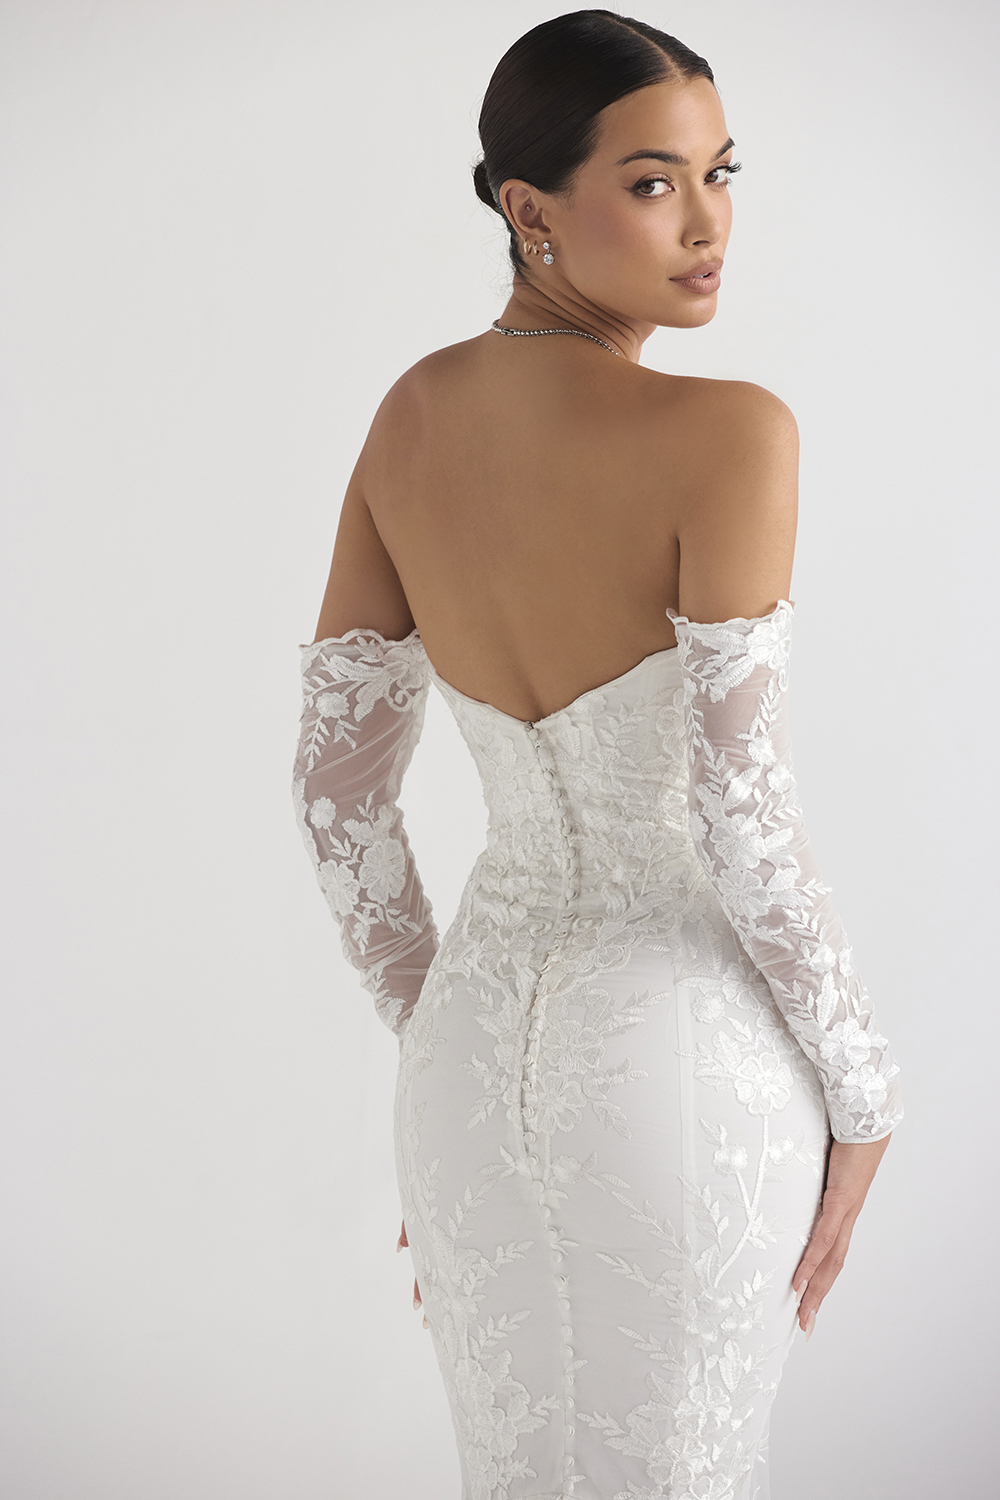 Clothing : Bridal : 'Isabelle' White Lace Long Sleeve Wedding Gown